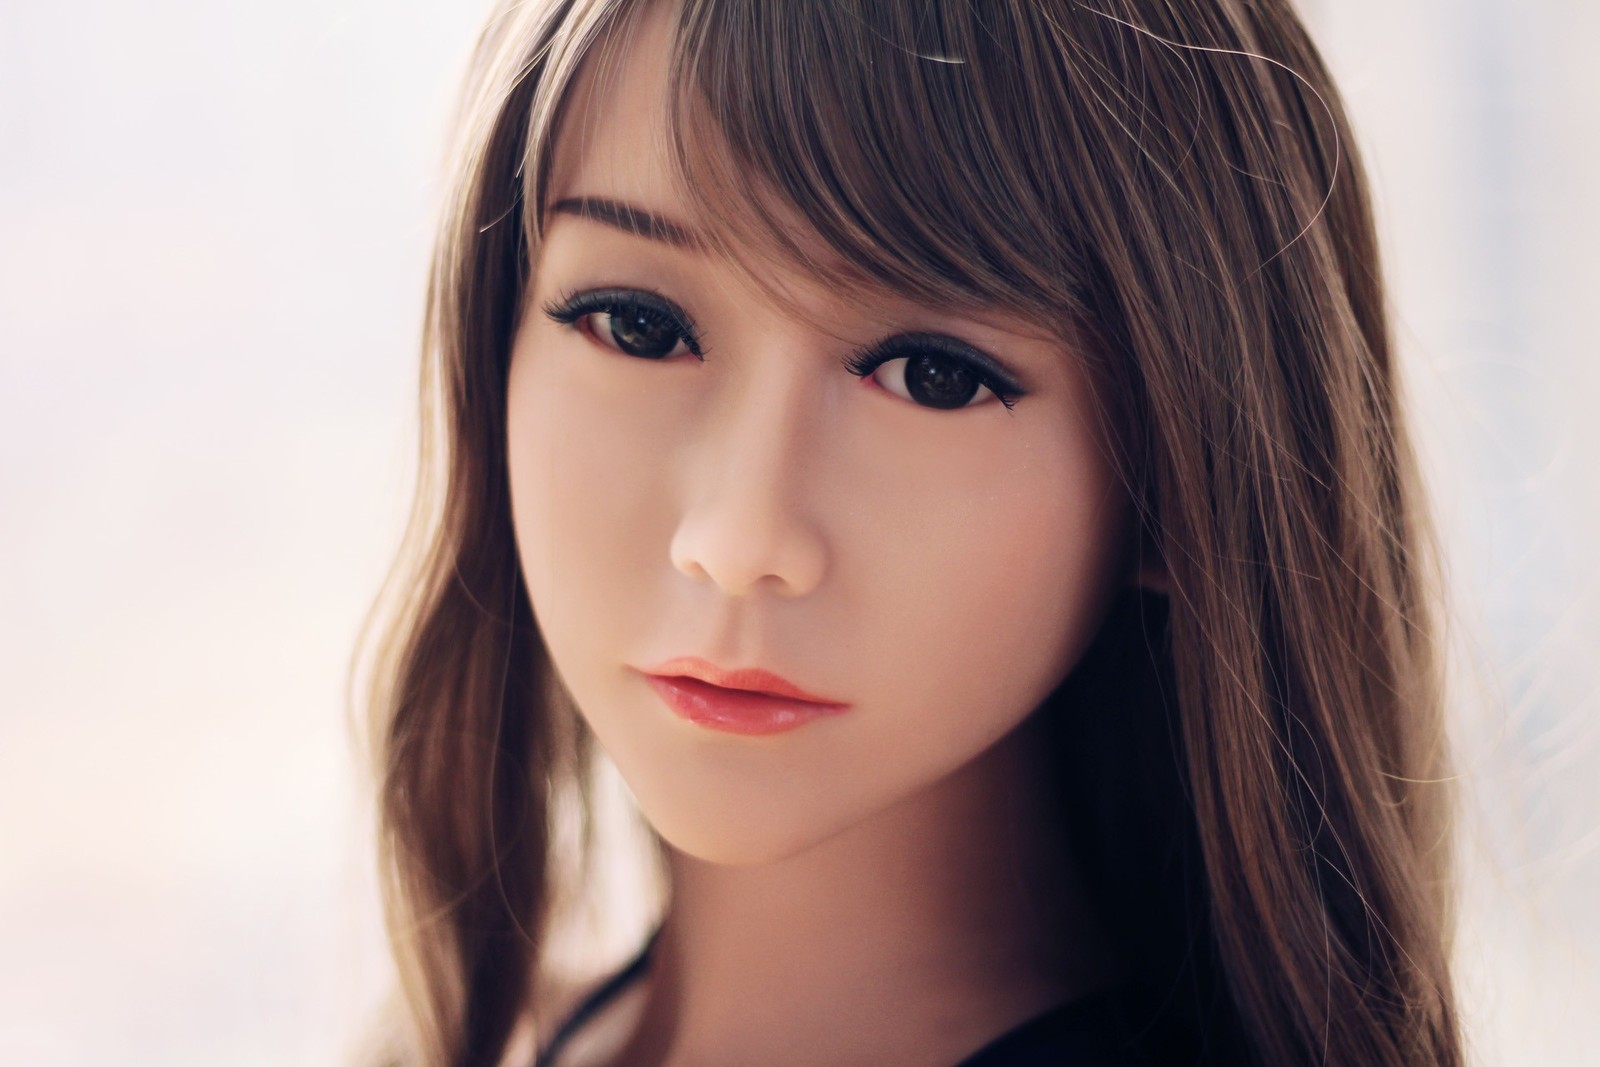 Lifelike Realistic Tpe Silicone Love Doll Female Mannequin Wmdoll Full Body Mannequins